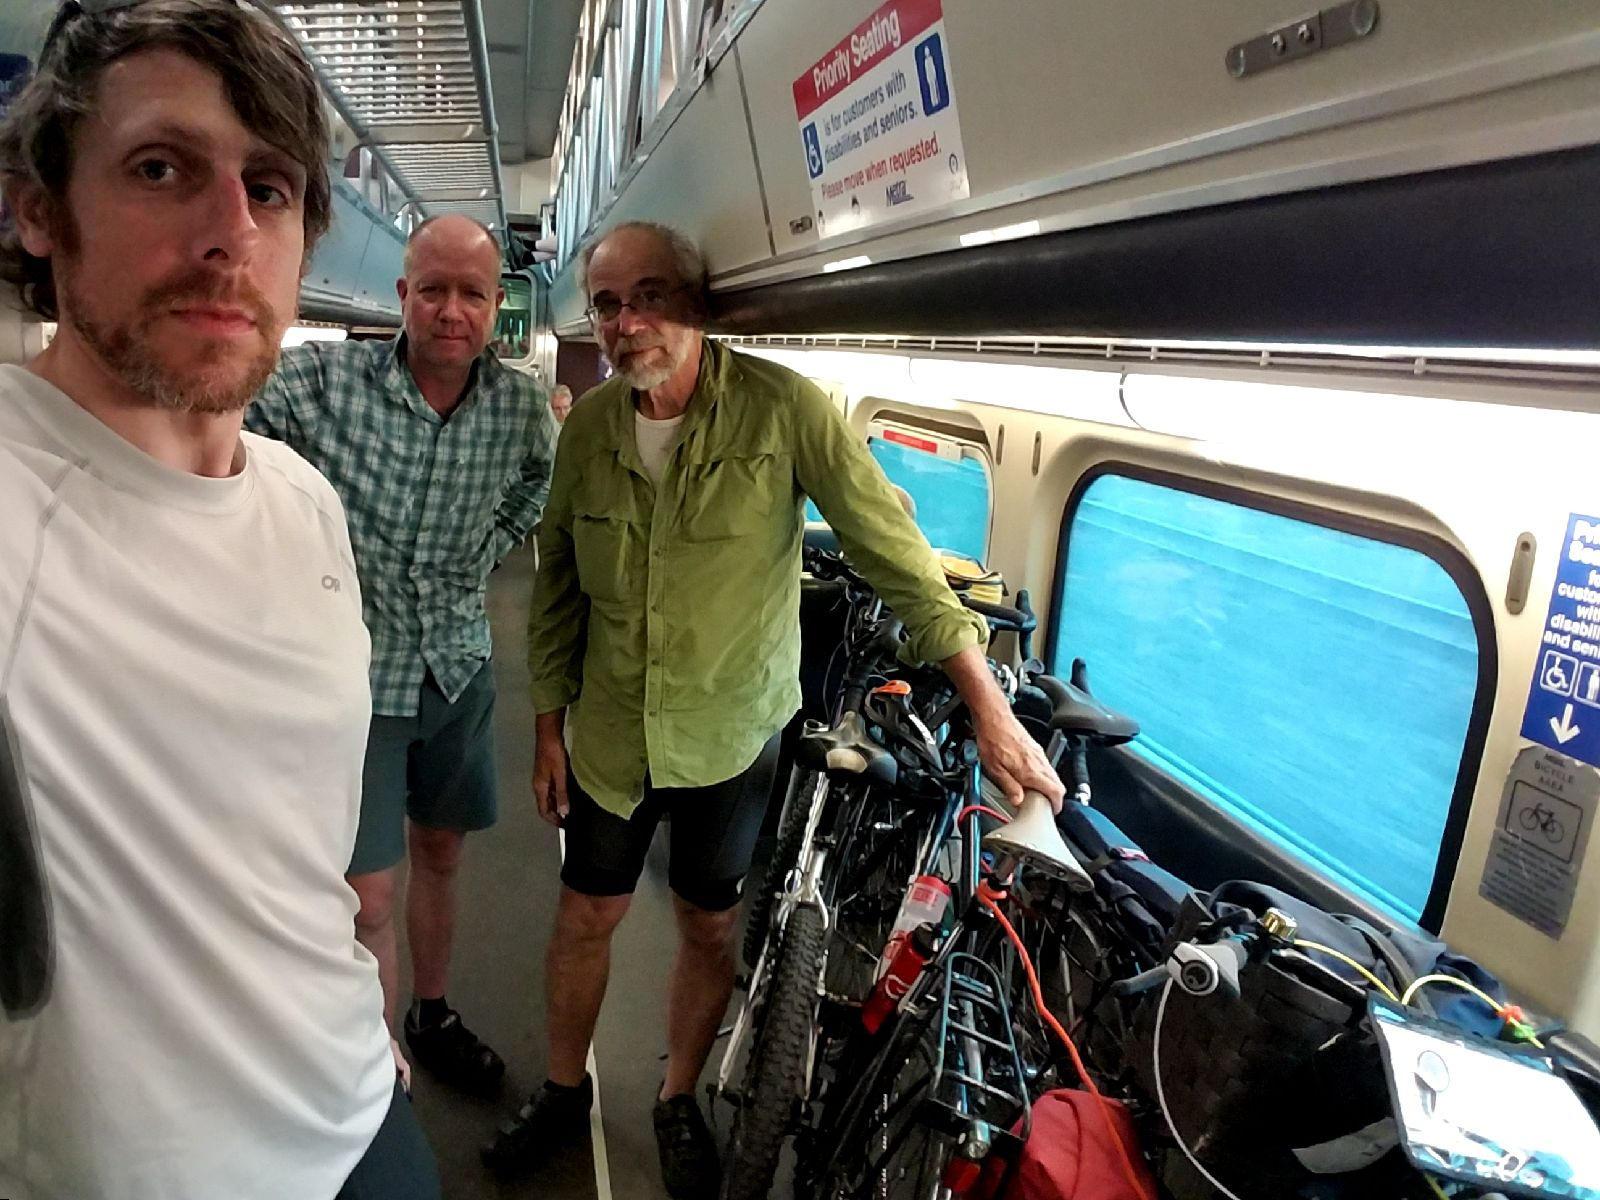 Metra Debuts Bike Car This Weekend, Giving New Meaning to 'Ride the Rails', Chicago News